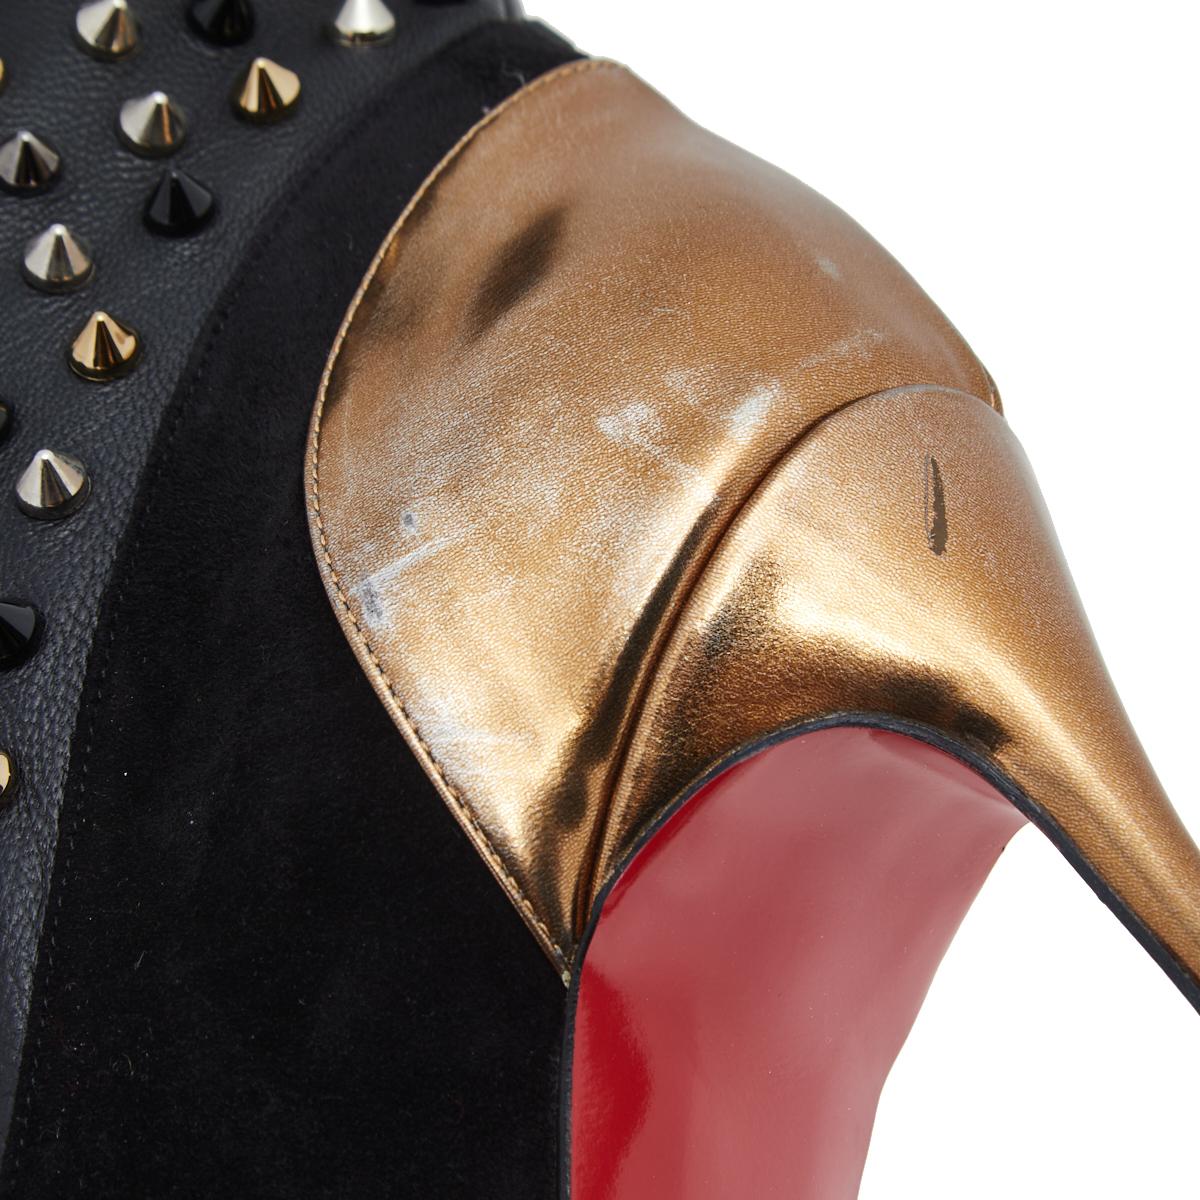 These Spike Wars boots from Christian Louboutin are eye-catching! The black ankle boots are crafted from soft suede and patent leather. They are decorated with spikes and lifted on stiletto heels. The signature red soles complete this fabulous